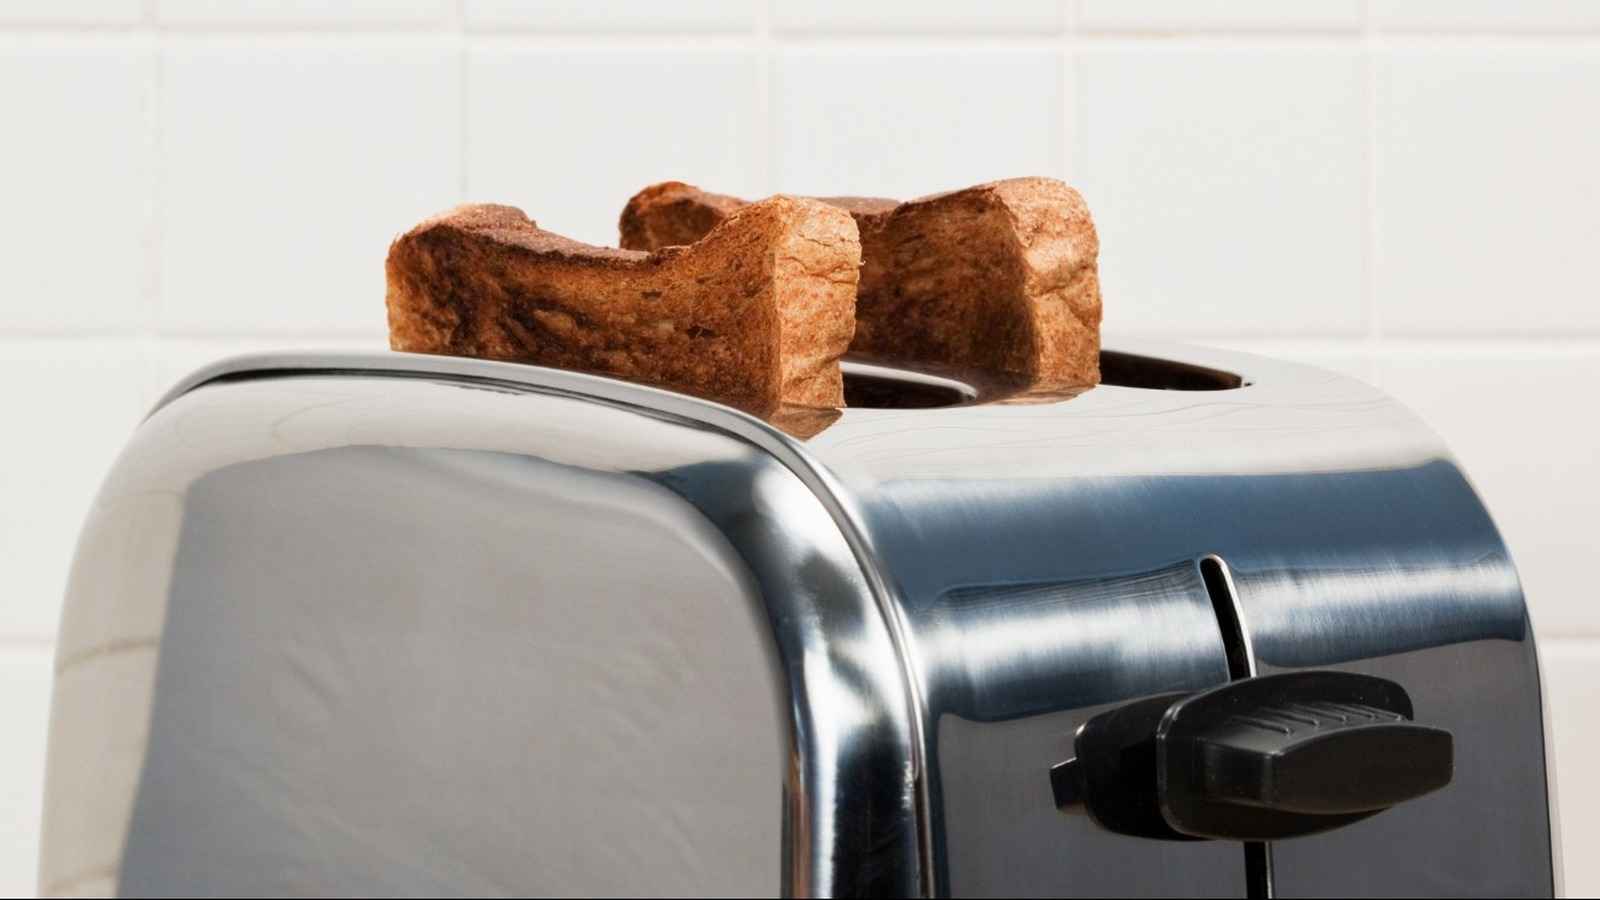 https://www.mashed.com/img/gallery/the-best-2-slice-toasters-of-2022/l-intro-1668284855.jpg